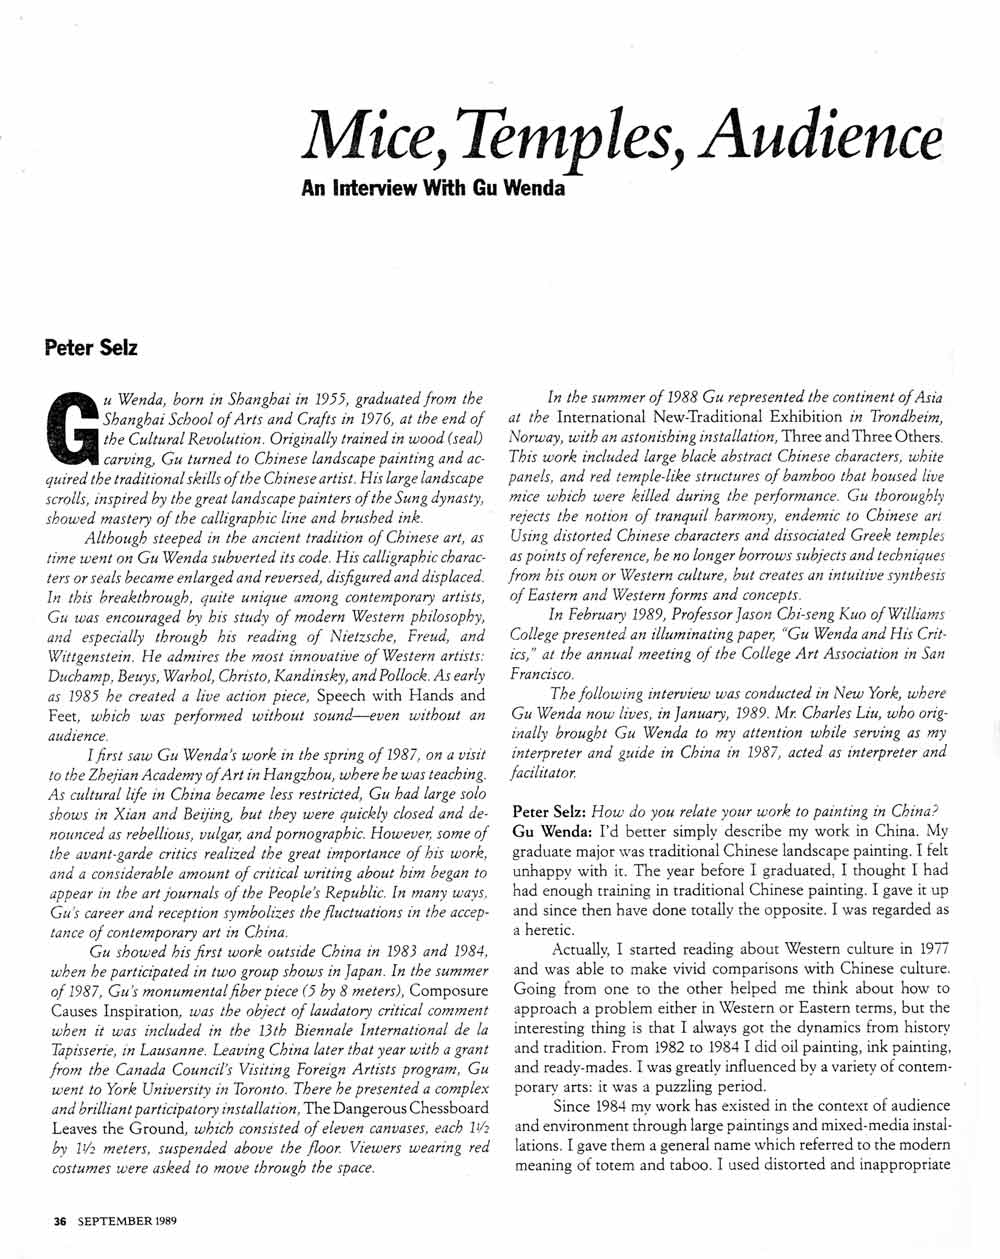 Mice, Temples, Audience, pg 1